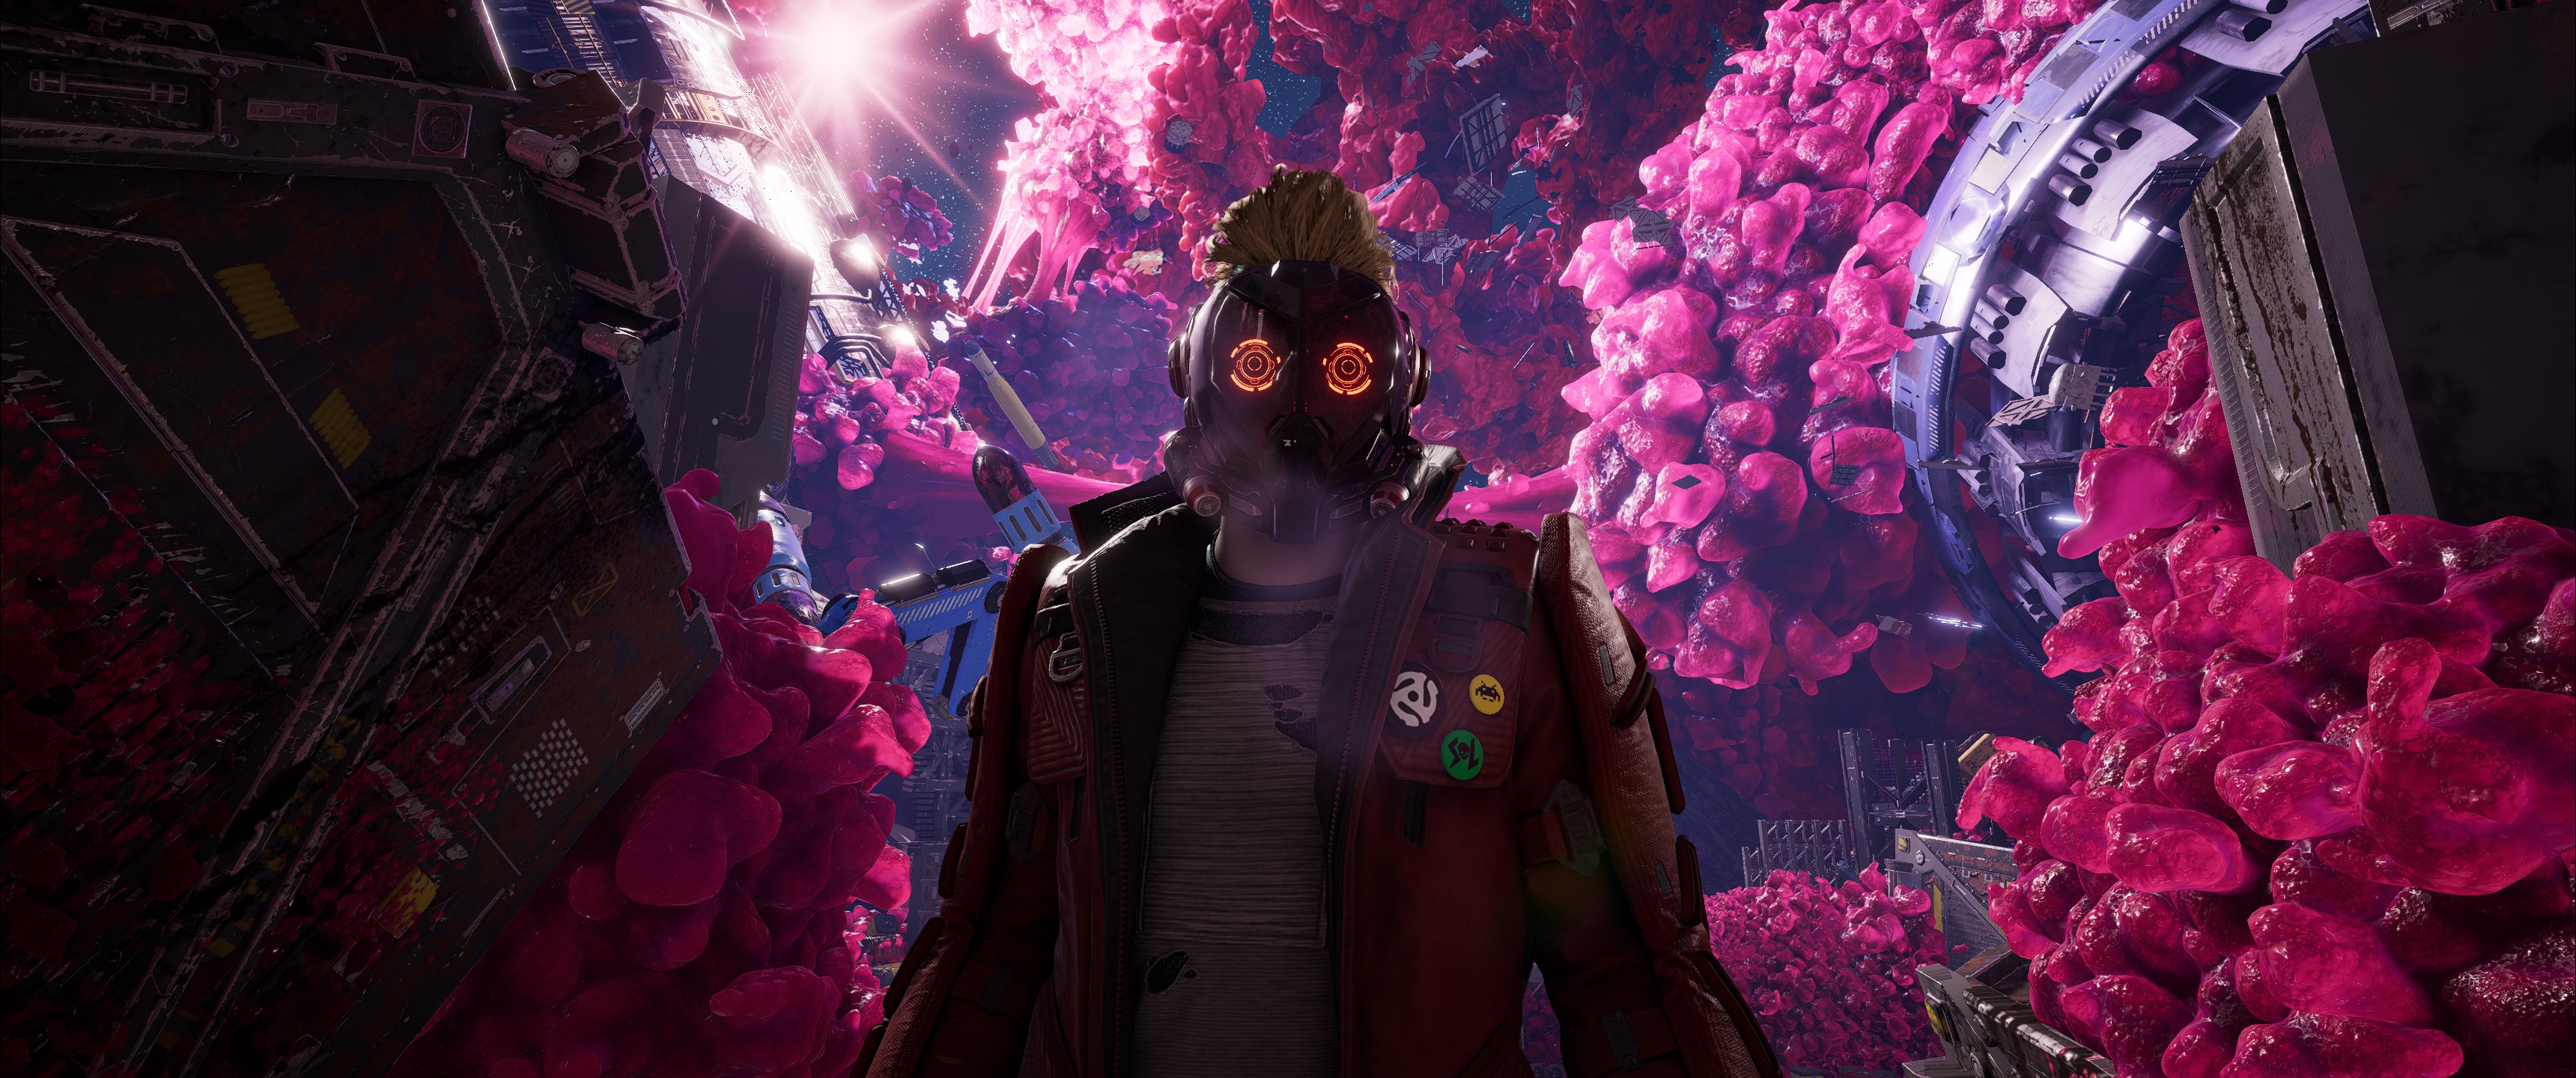 General 3440x1440 Star-Lord Peter Quill Guardians of the Galaxy (Game) ultrawide mask looking at viewer CGI screen shot